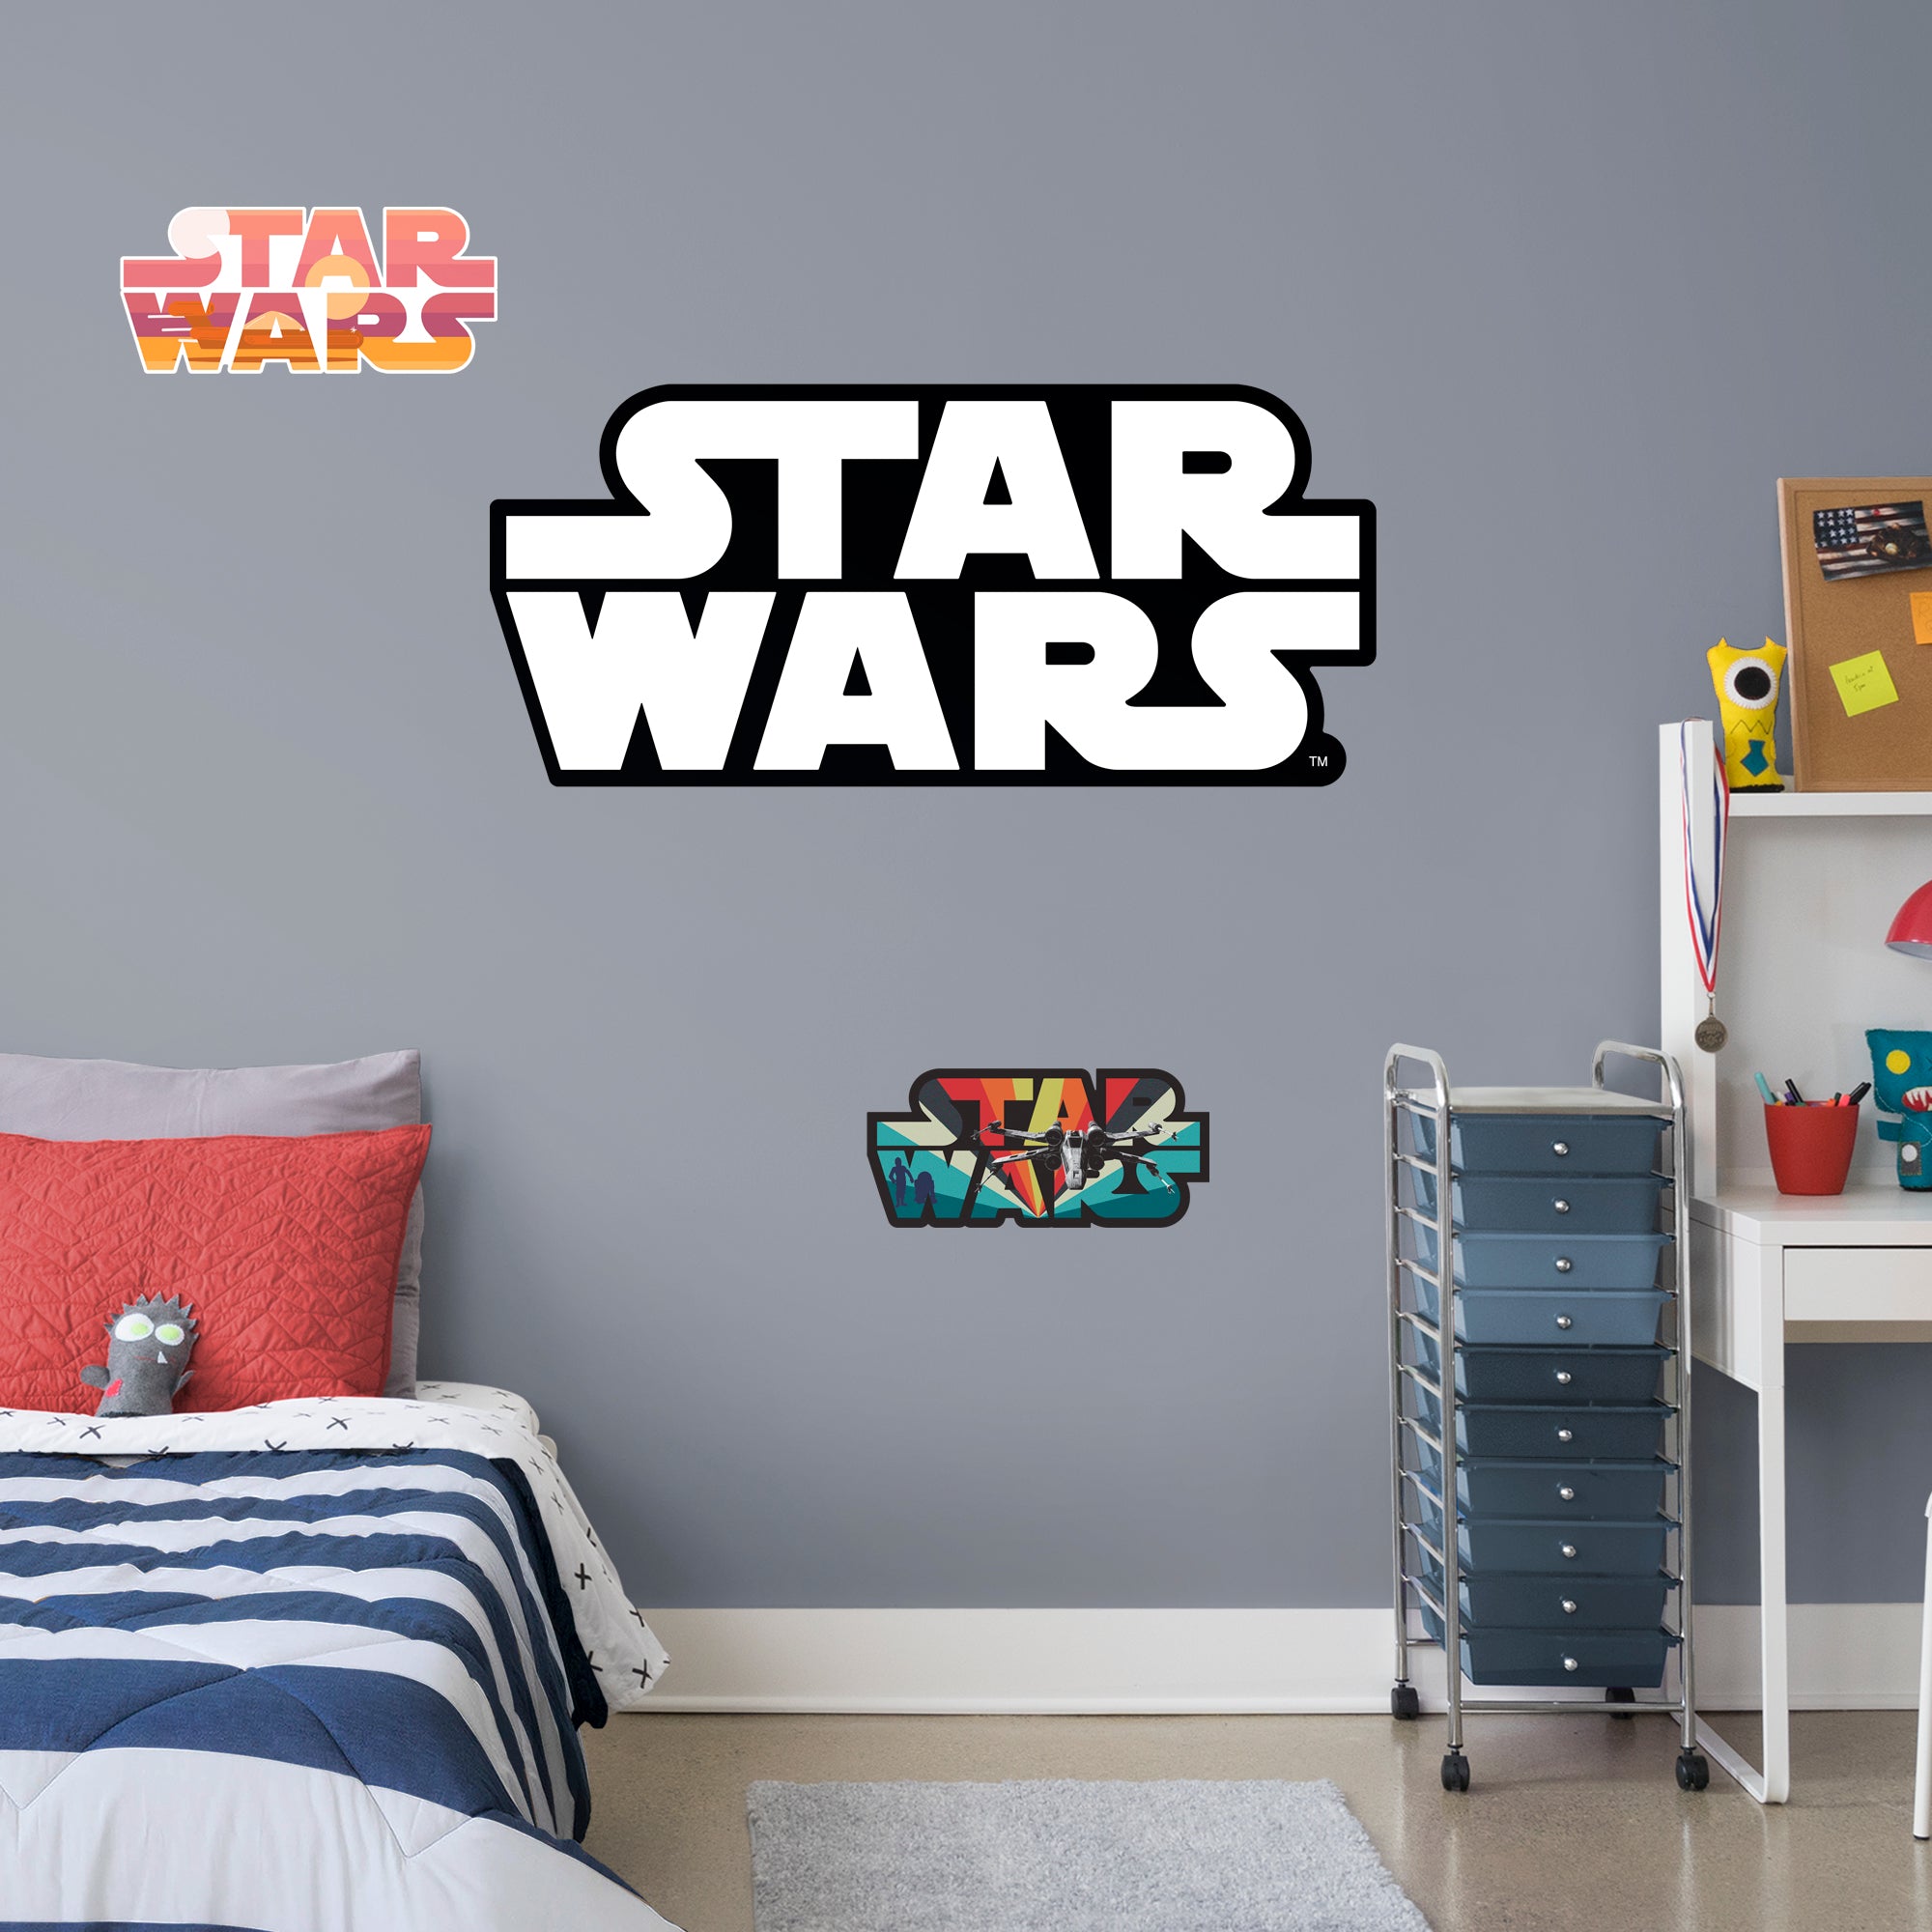 Primary Logo - Officially Licensed Star Wars Removable Wall Decal Giant Logo (51"W x 23"H) by Fathead | Vinyl